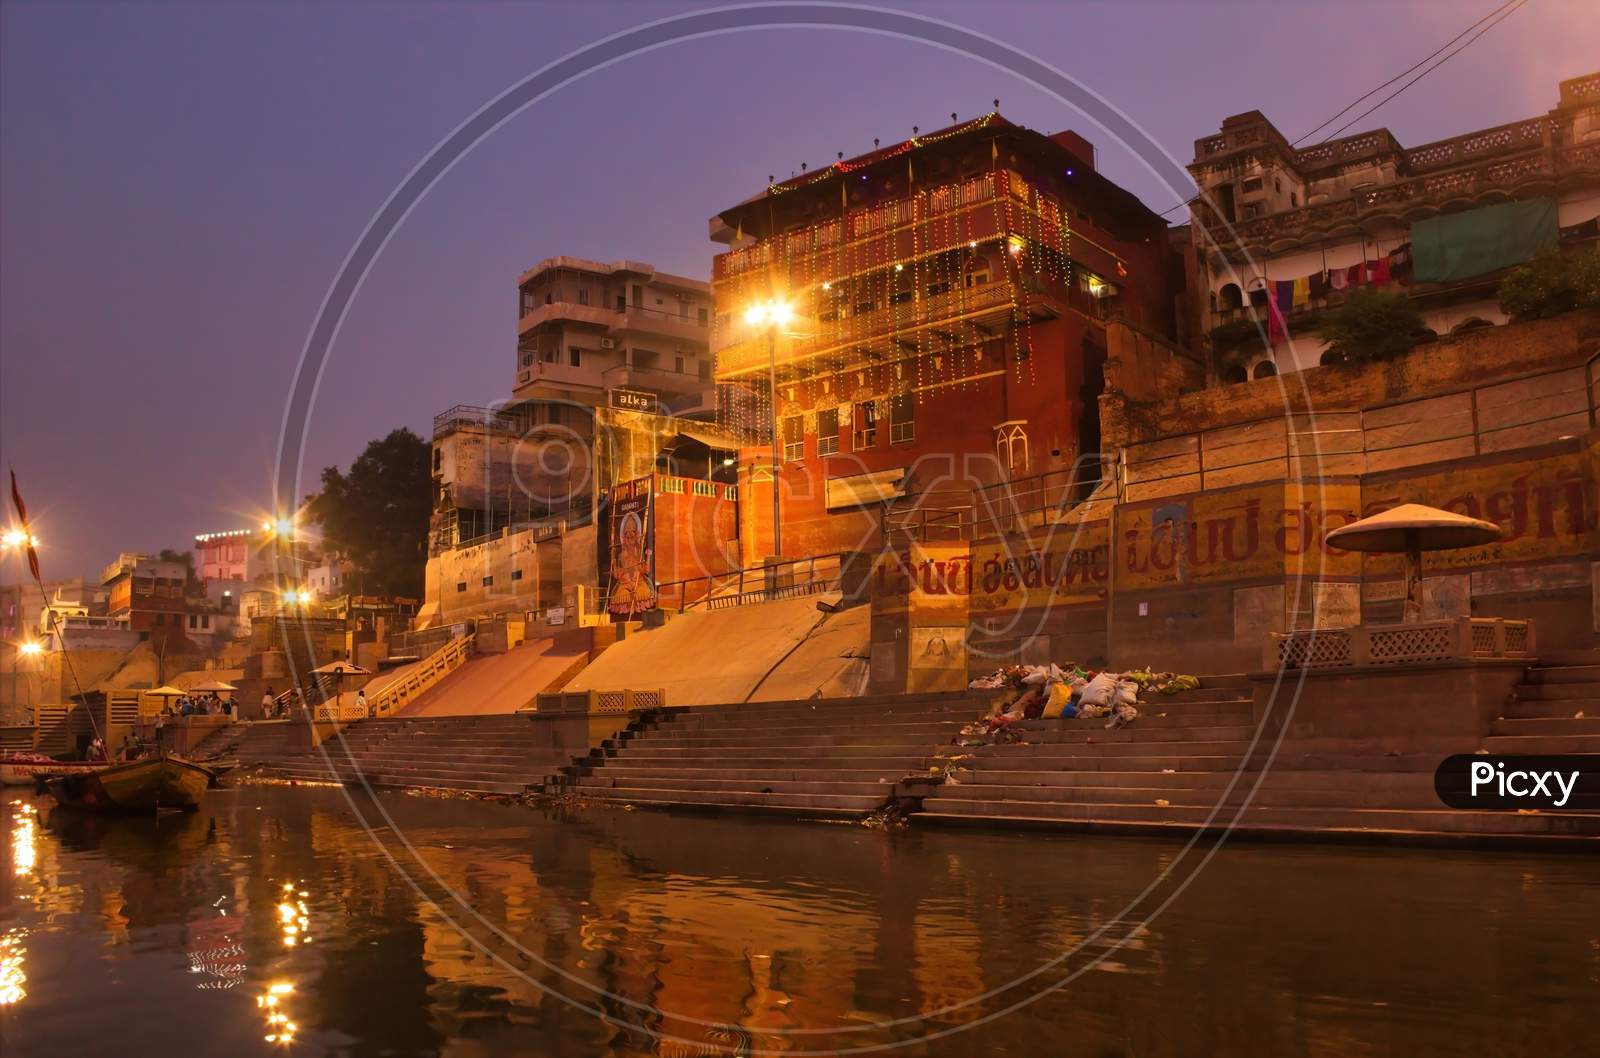 India, Varanasi Ganges River Ghat With Ancient City Architecture As Viewed From A Boat On The River At Morning Time.